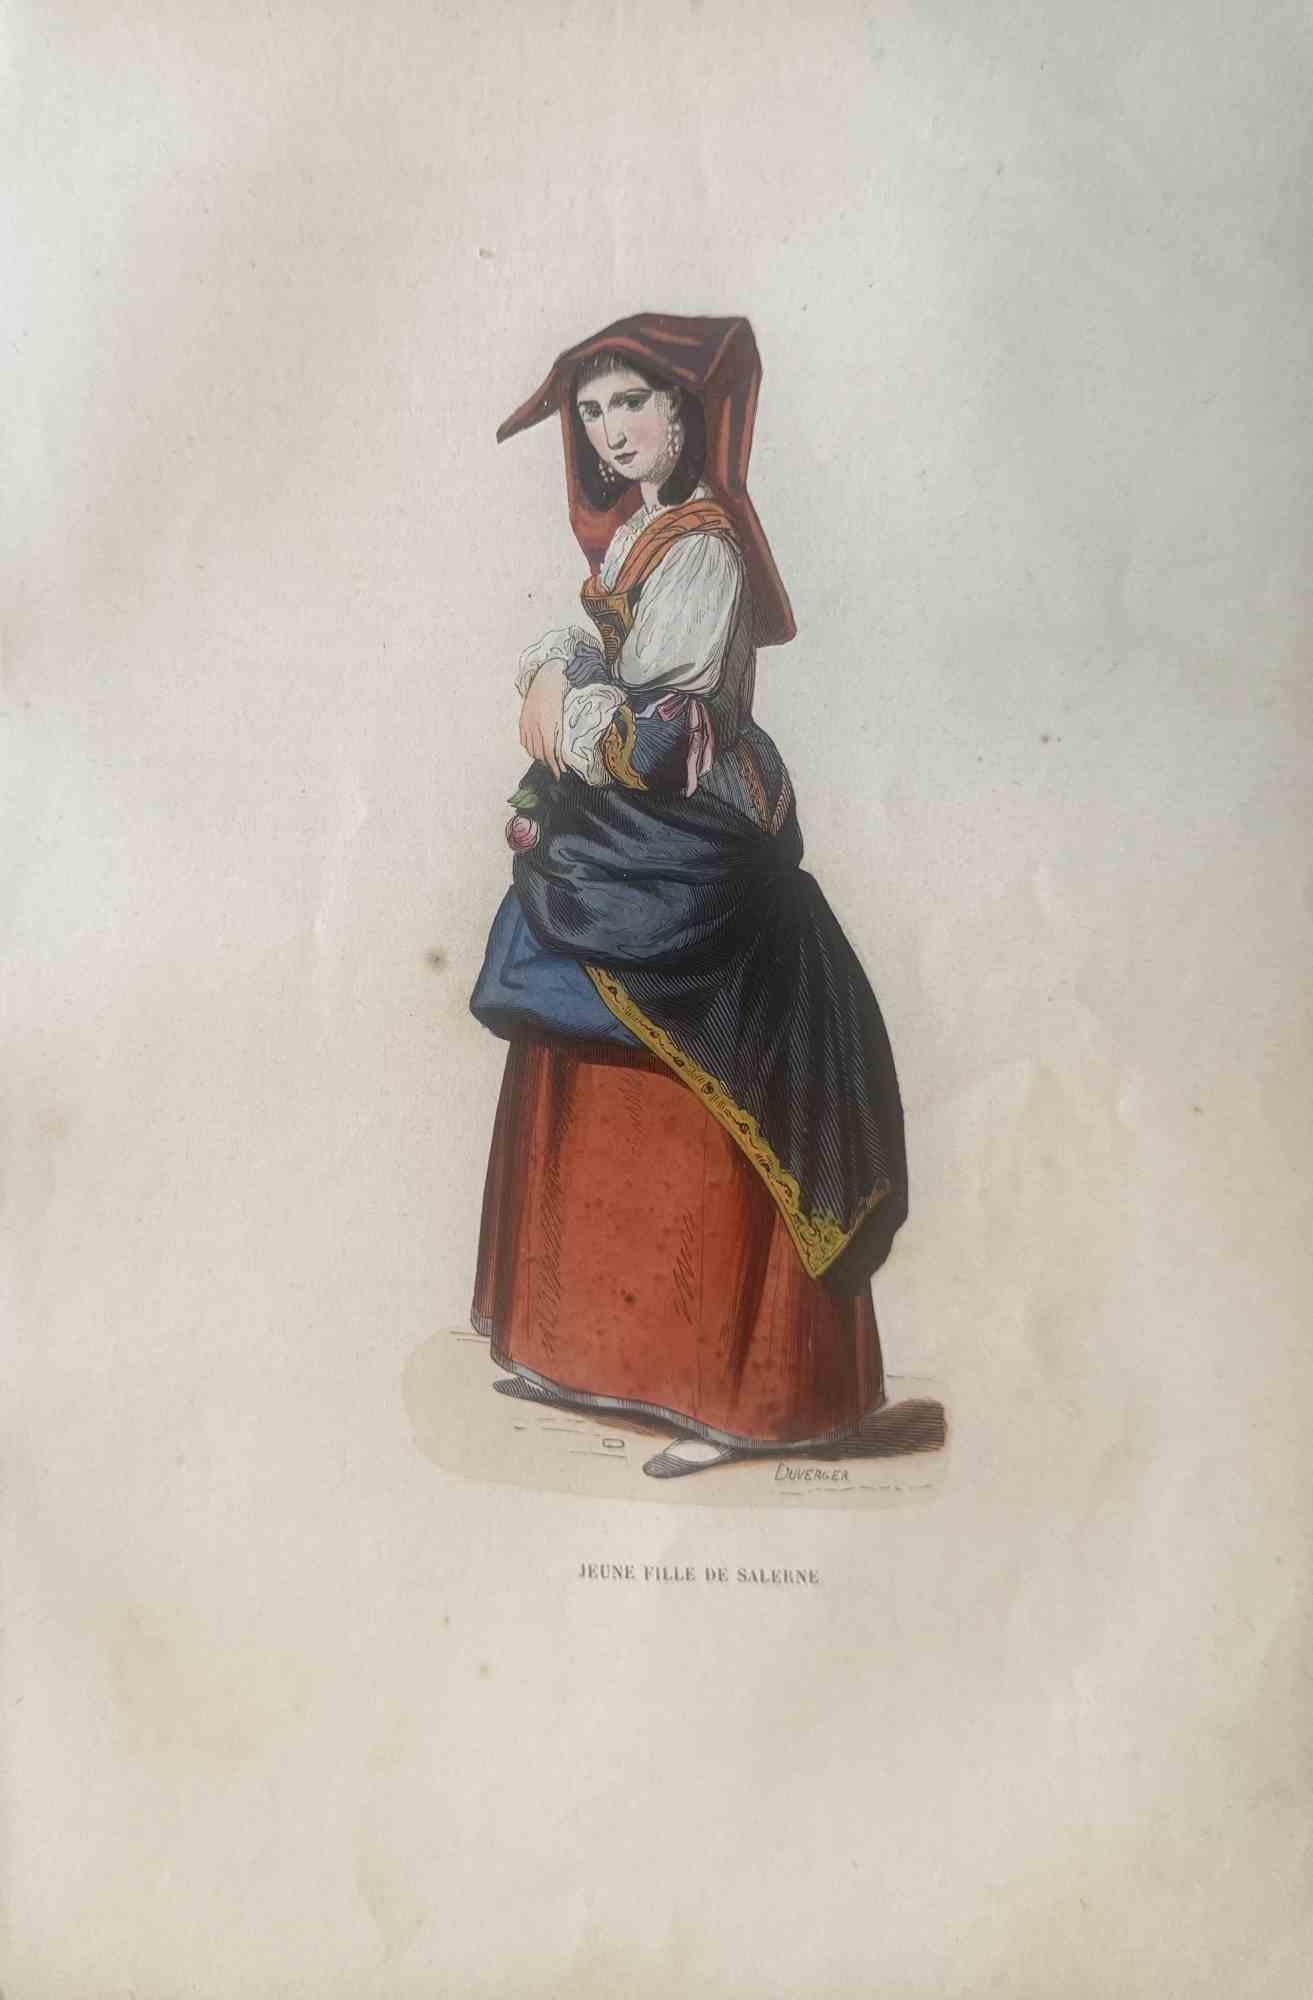 Various Artists Figurative Print - Uses and Customs - Lady from Salerno  - Lithograph - 1862